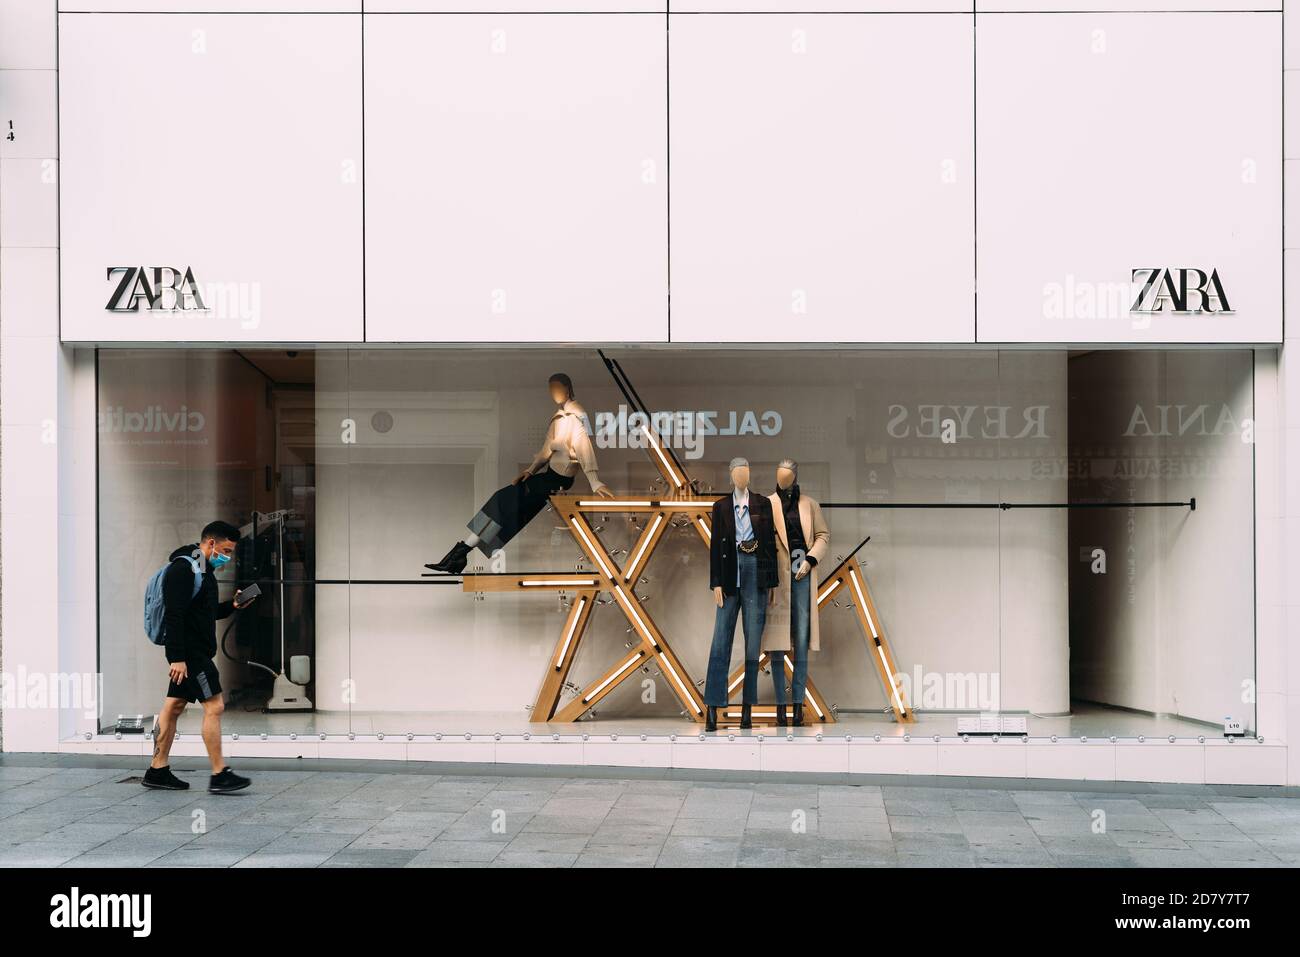 Madrid, Spain - 3rd October, 2020: Shop window of Zara fashion store on Preciados Street. Young man wearing face mask walking by Stock Photo